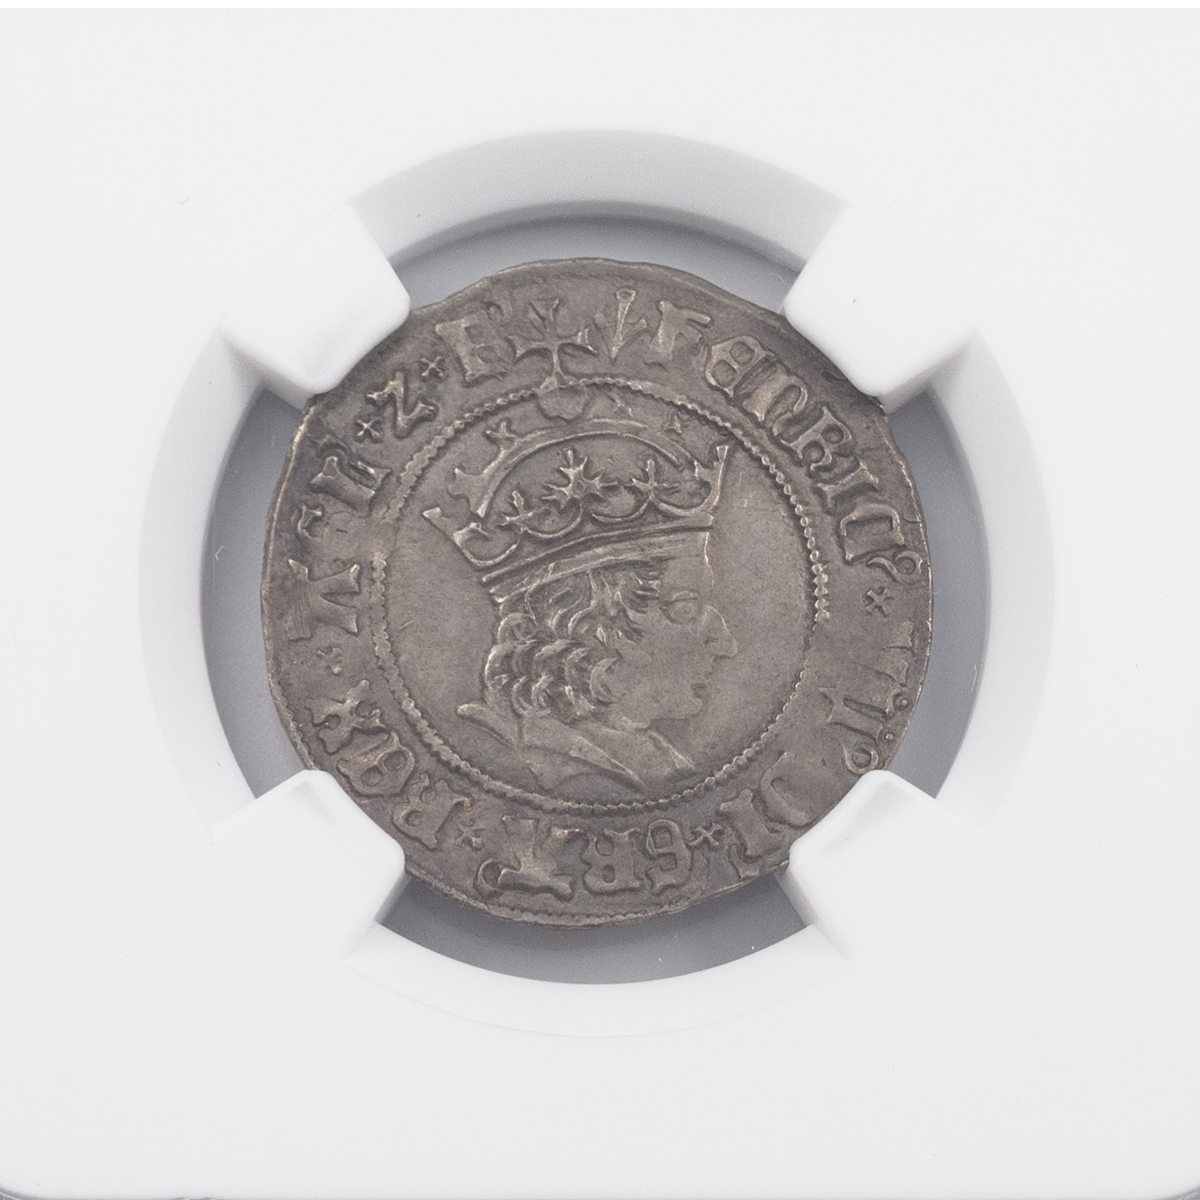 1505-1509 King Henry VII hammered silver 'Profile Issue' Groat with pheon mintmark (S 2258). Obve... - Image 2 of 4